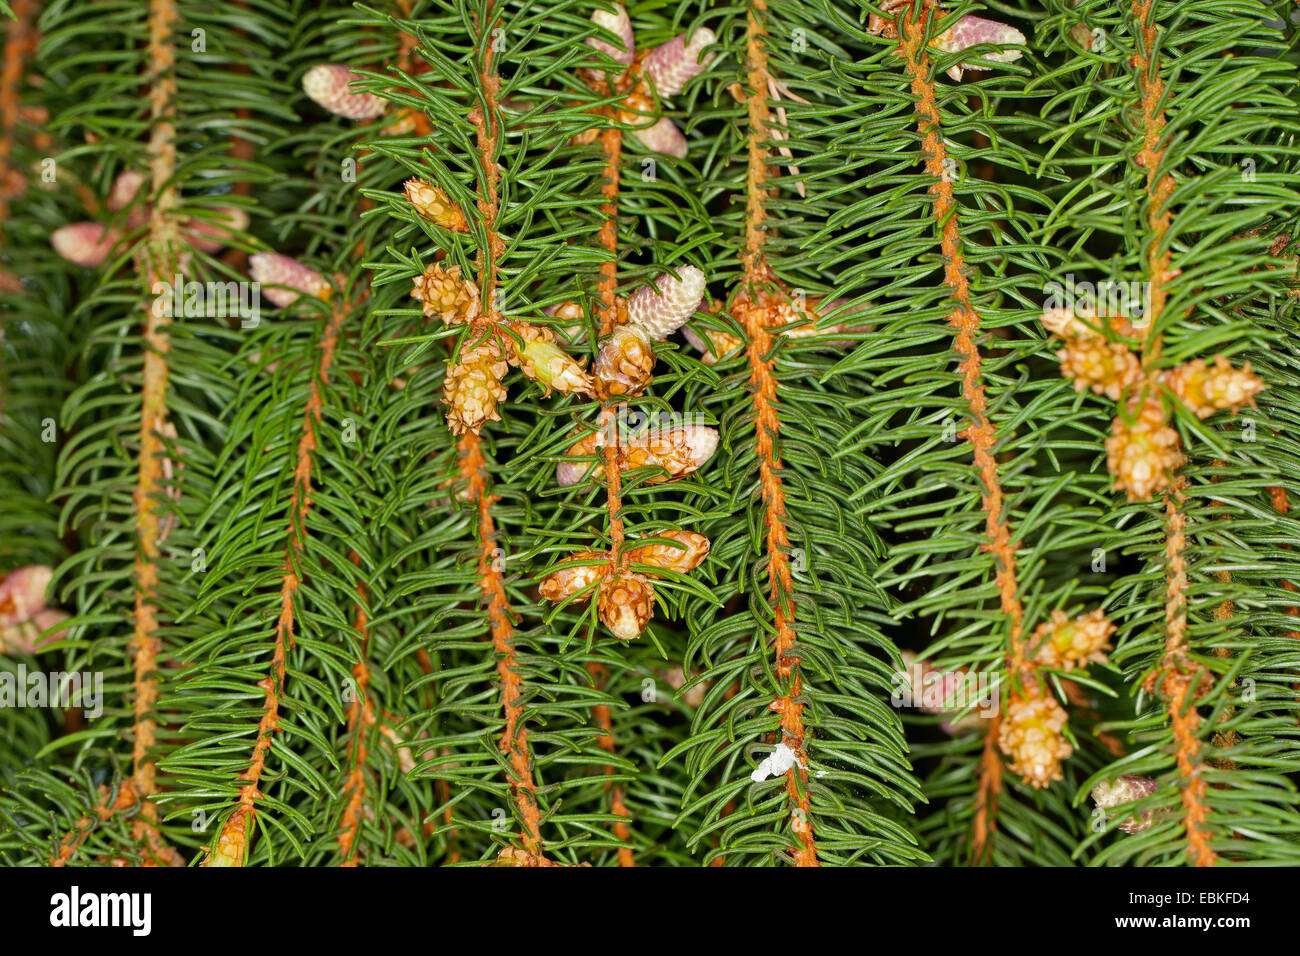 Norway spruce (Picea abies), branch with male flowers, Germany Stock Photo